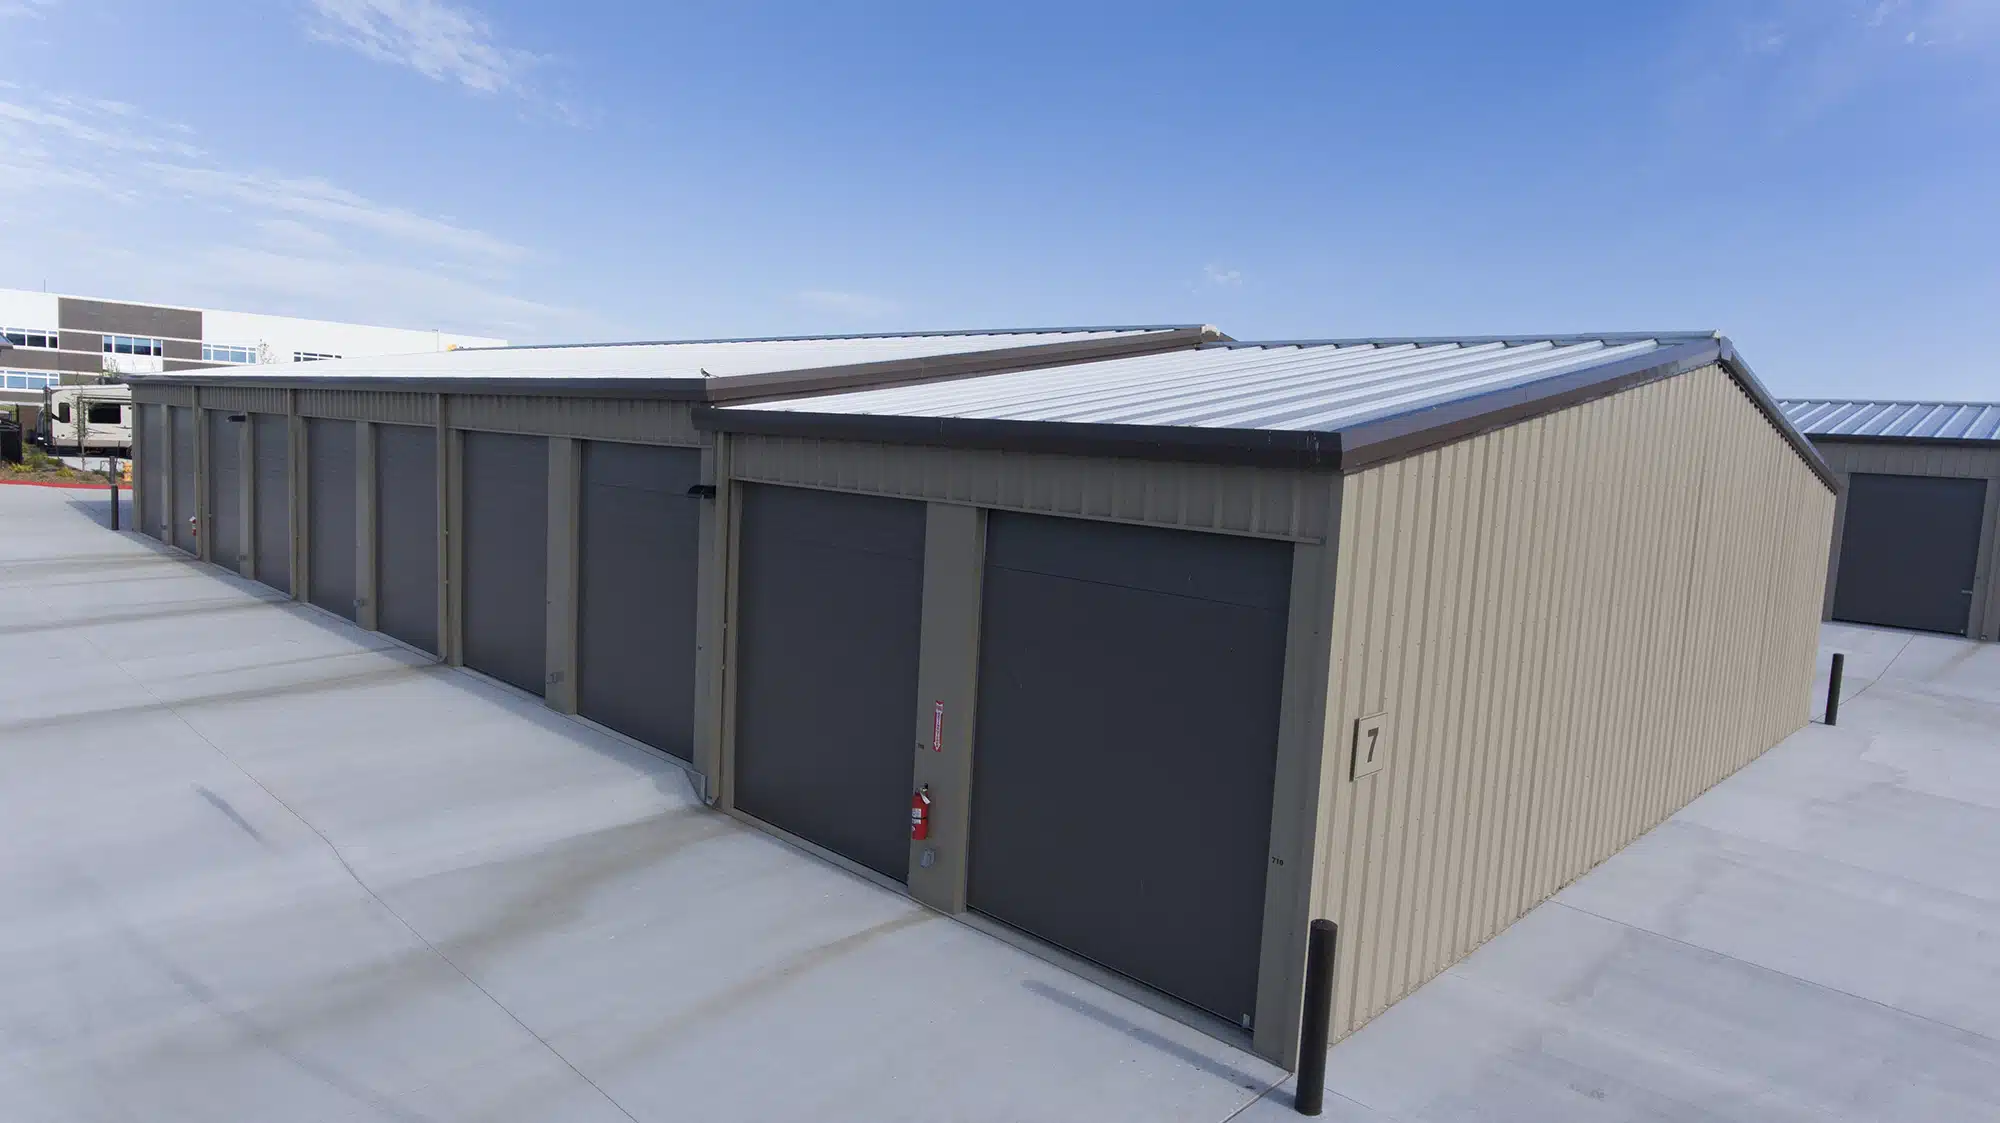 Self Storage Building R-Loc in Desert Walls and Galvalume Roof